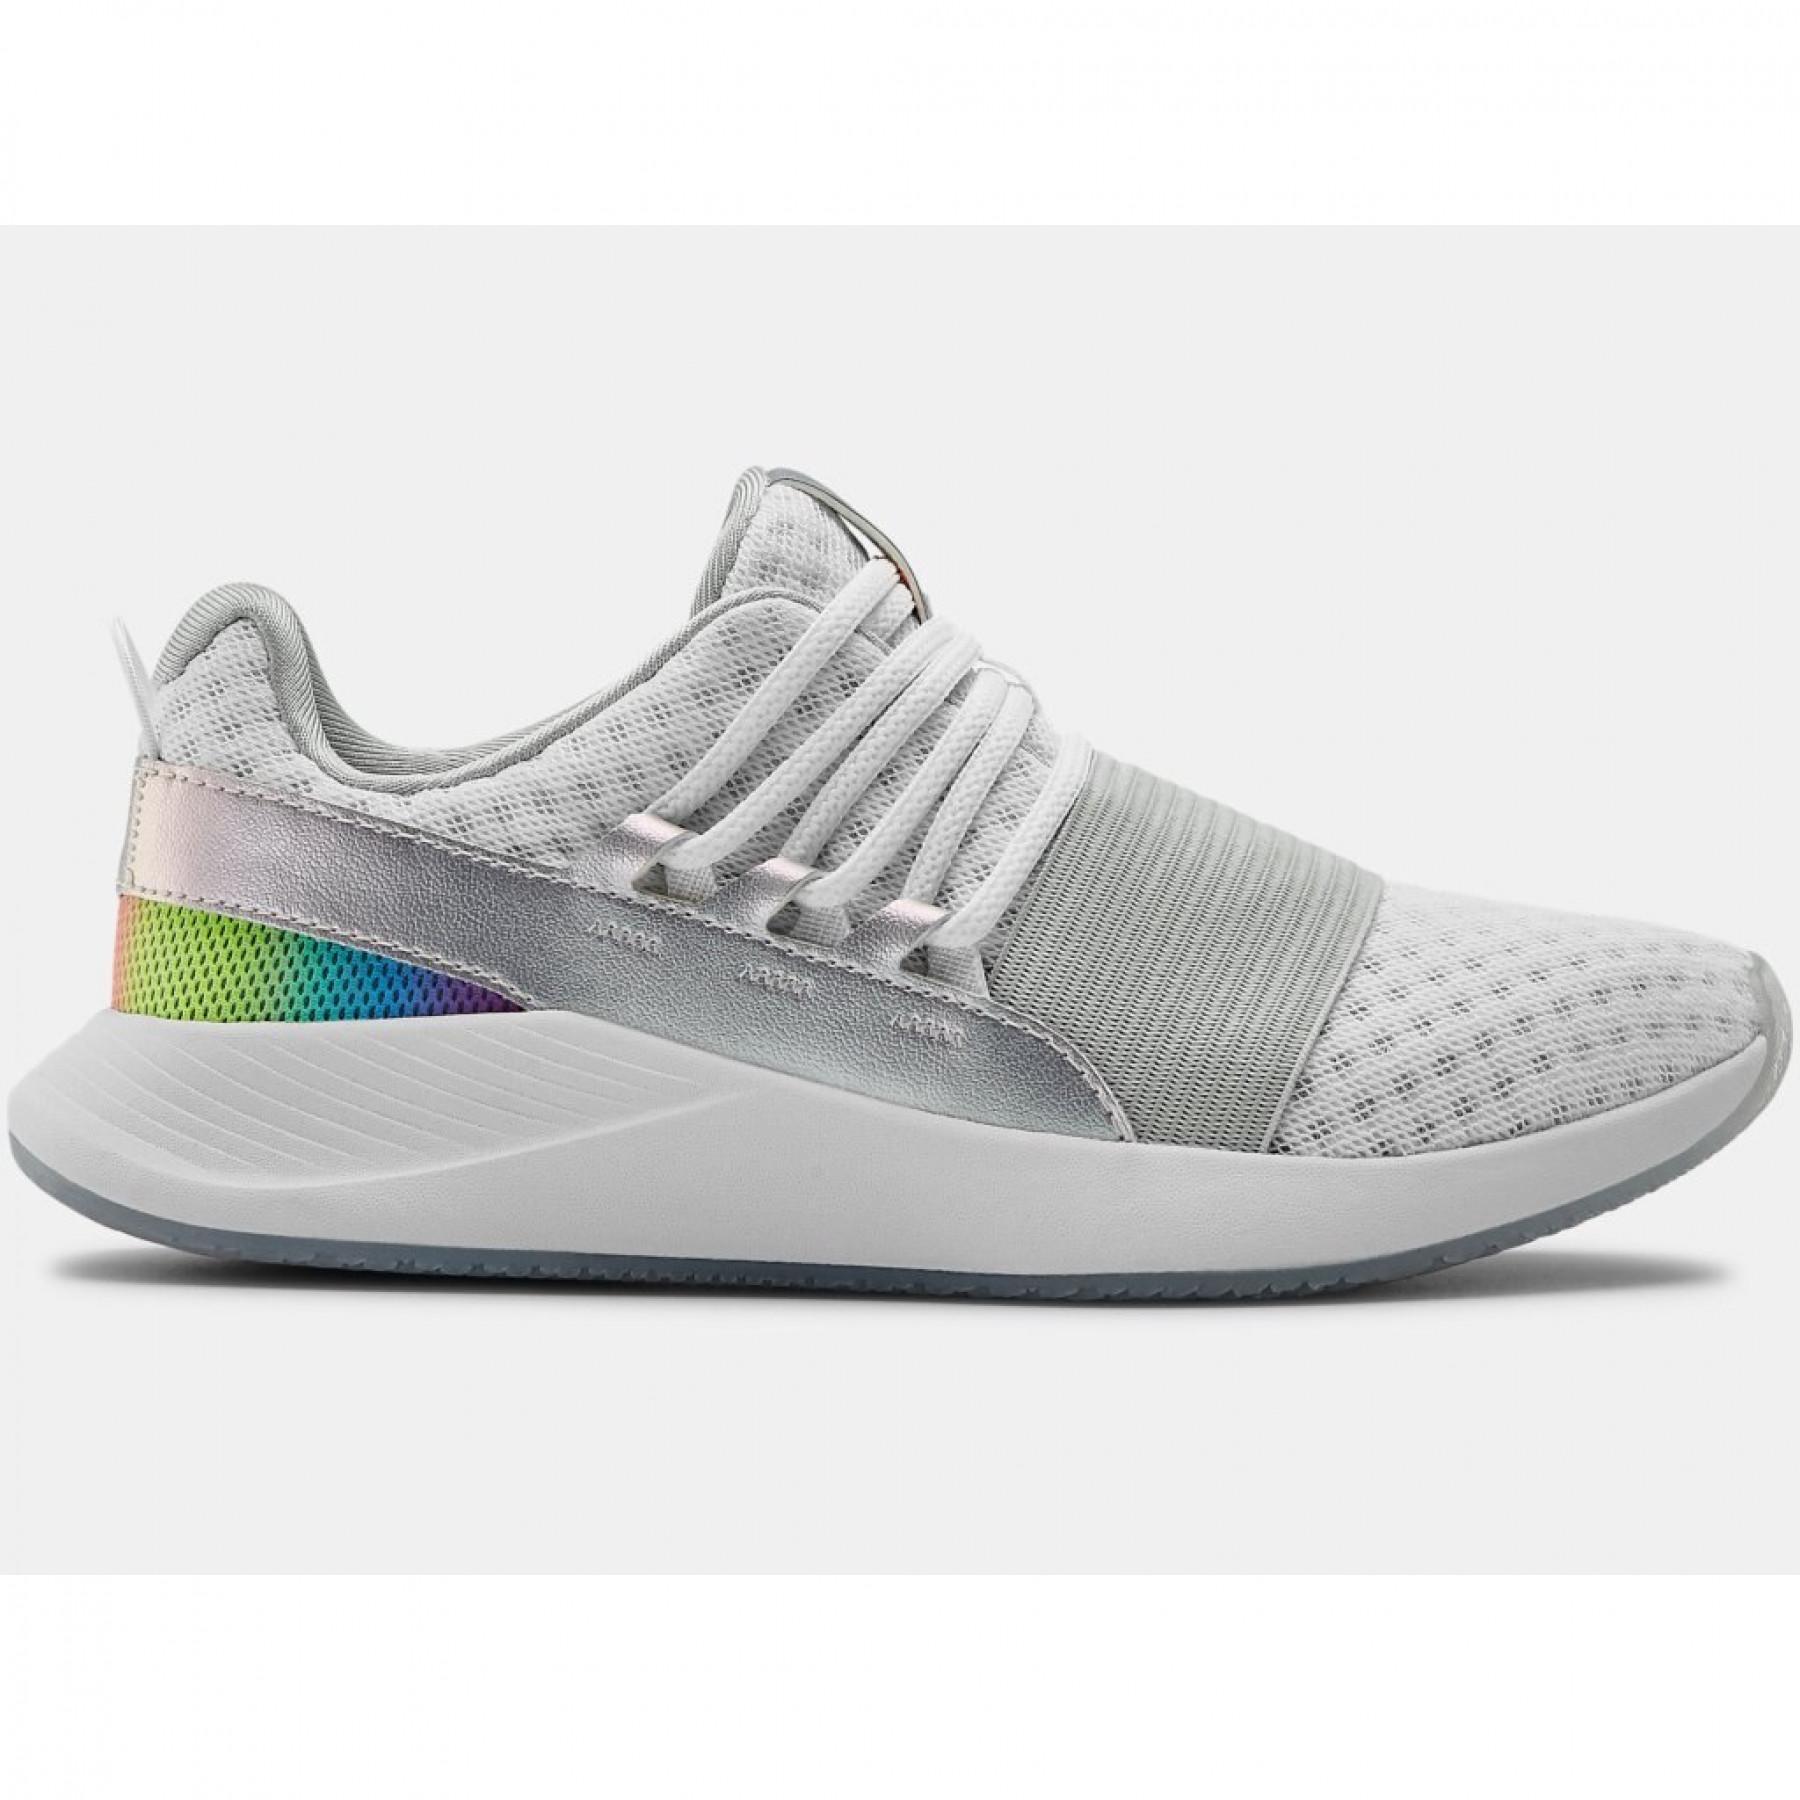 Formadoras de mulheres Under Armour Charged Breathe Iridescent